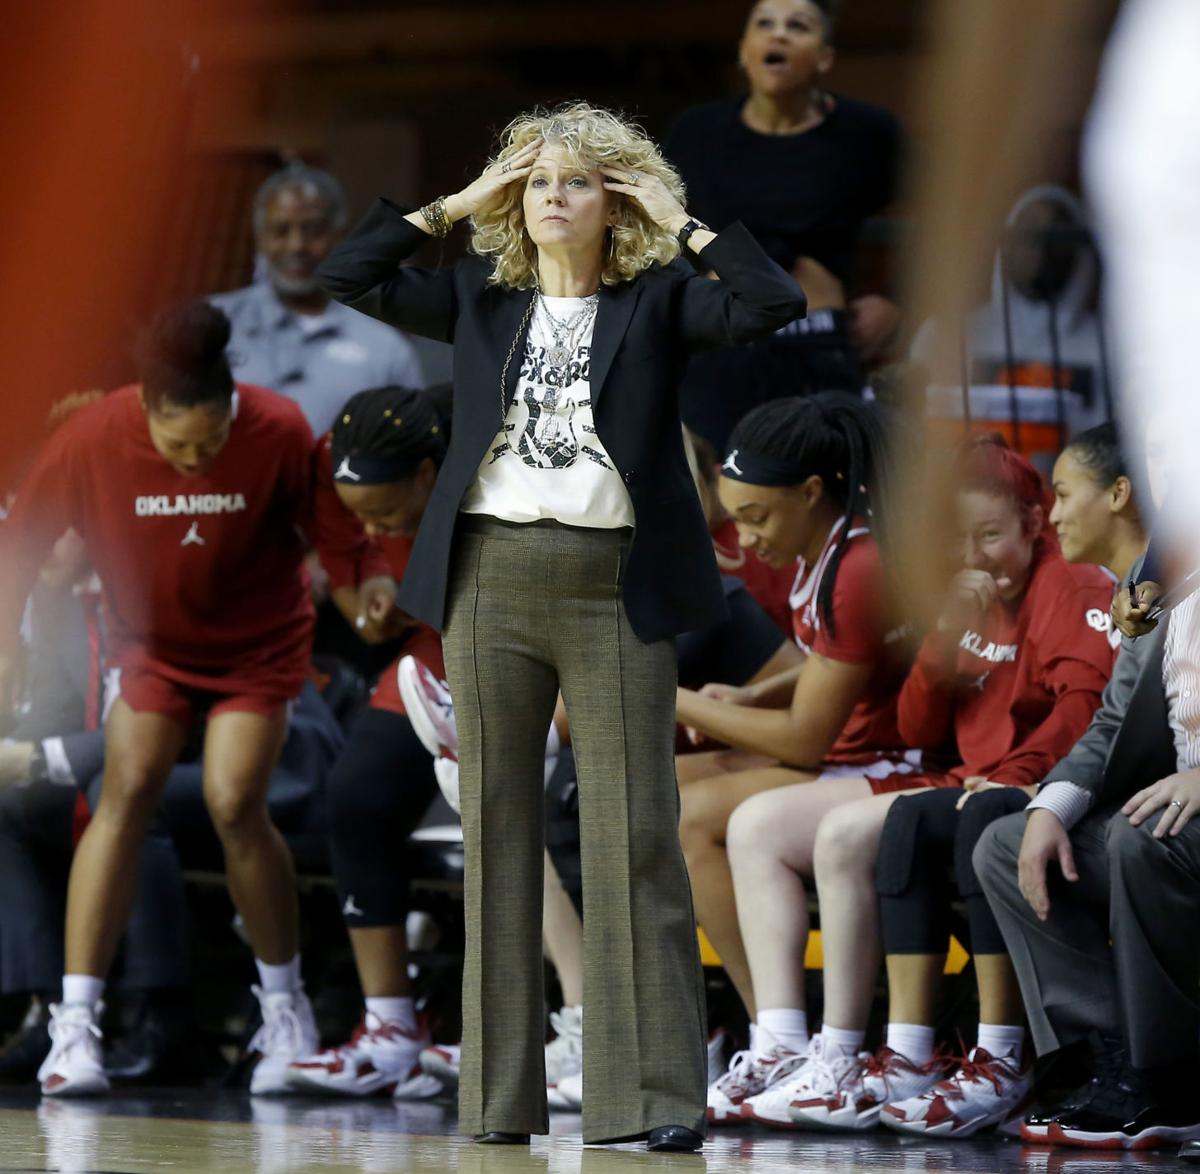 Black WBB Coaches Are Thriving in the SEC - Global Sport Matters